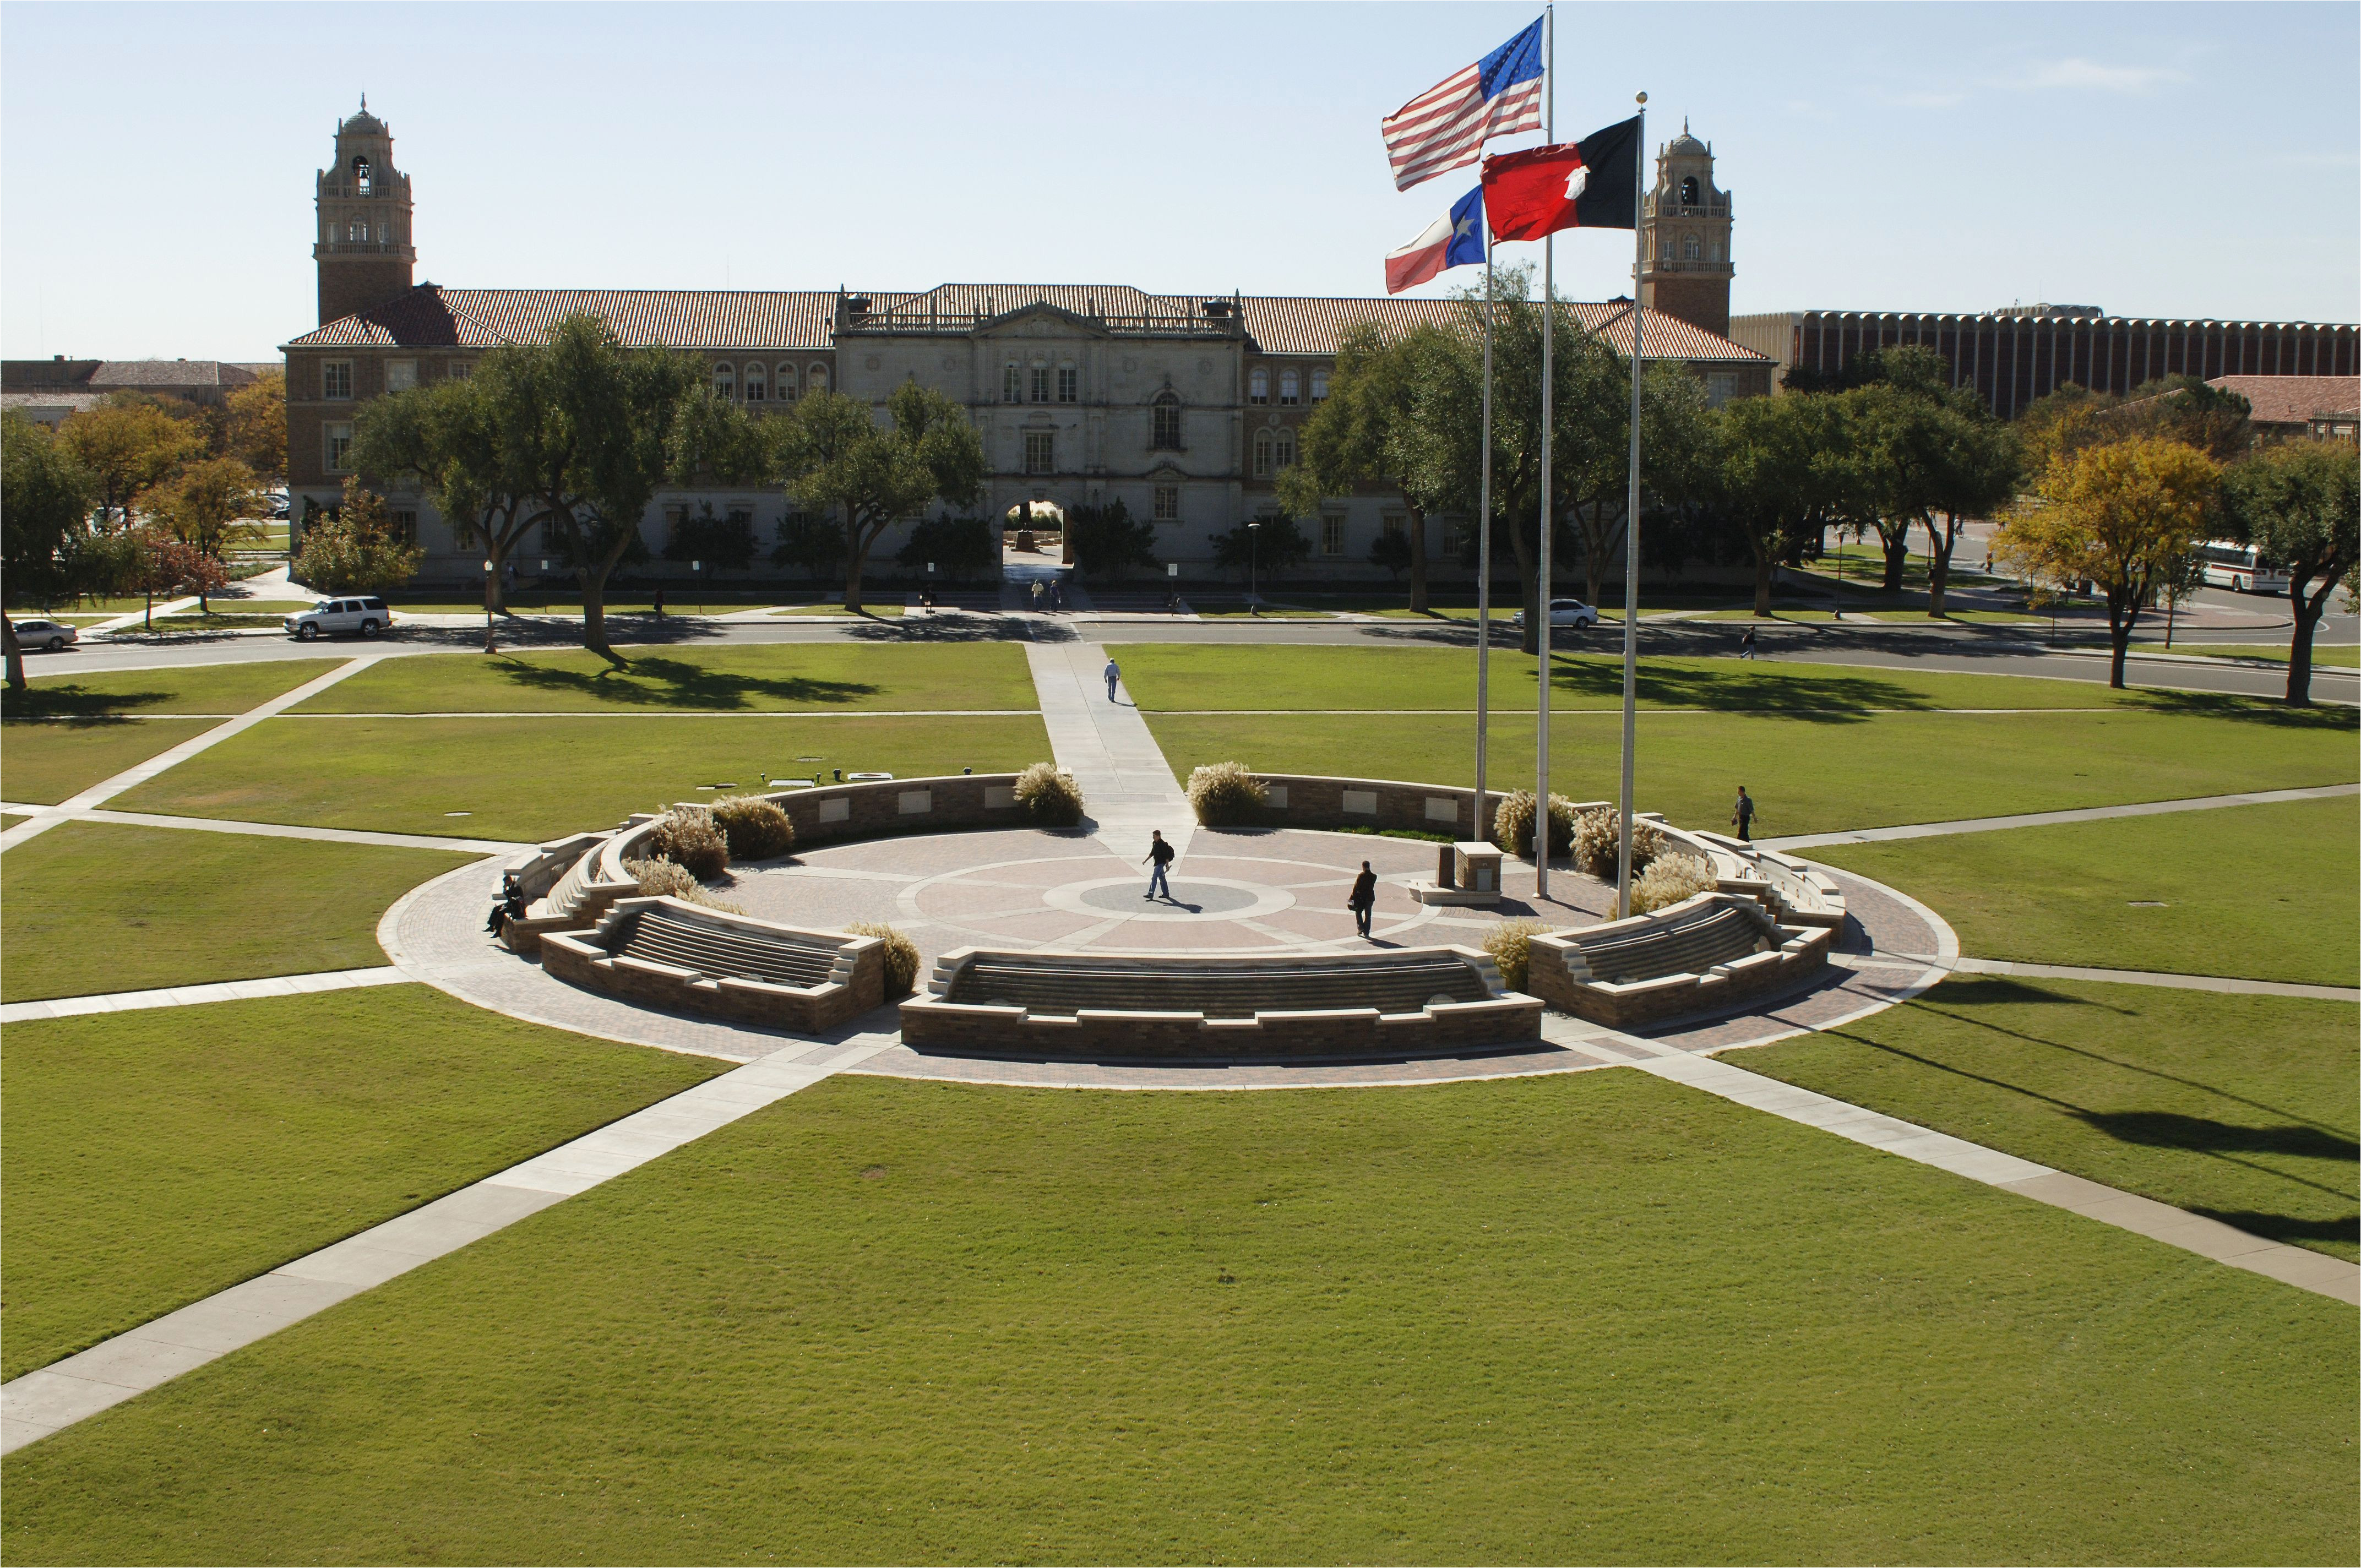 Texas Tech Campus Map Favorite Place Ever My Beautiful Texas Tech Campus Miss It so